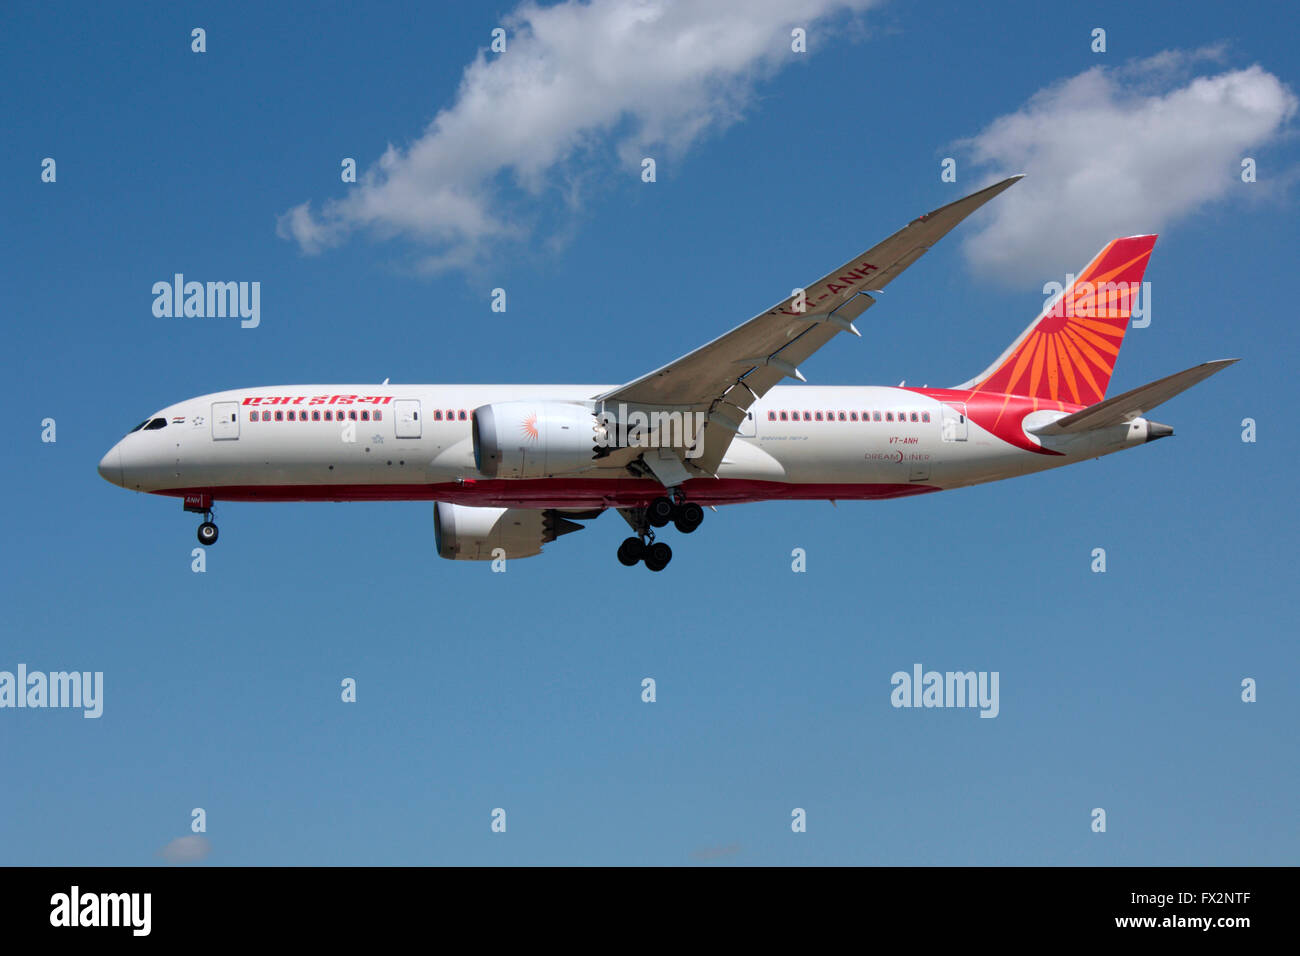 Air India Boeing 787 Dreamliner long haul jet plane on approach Stock Photo